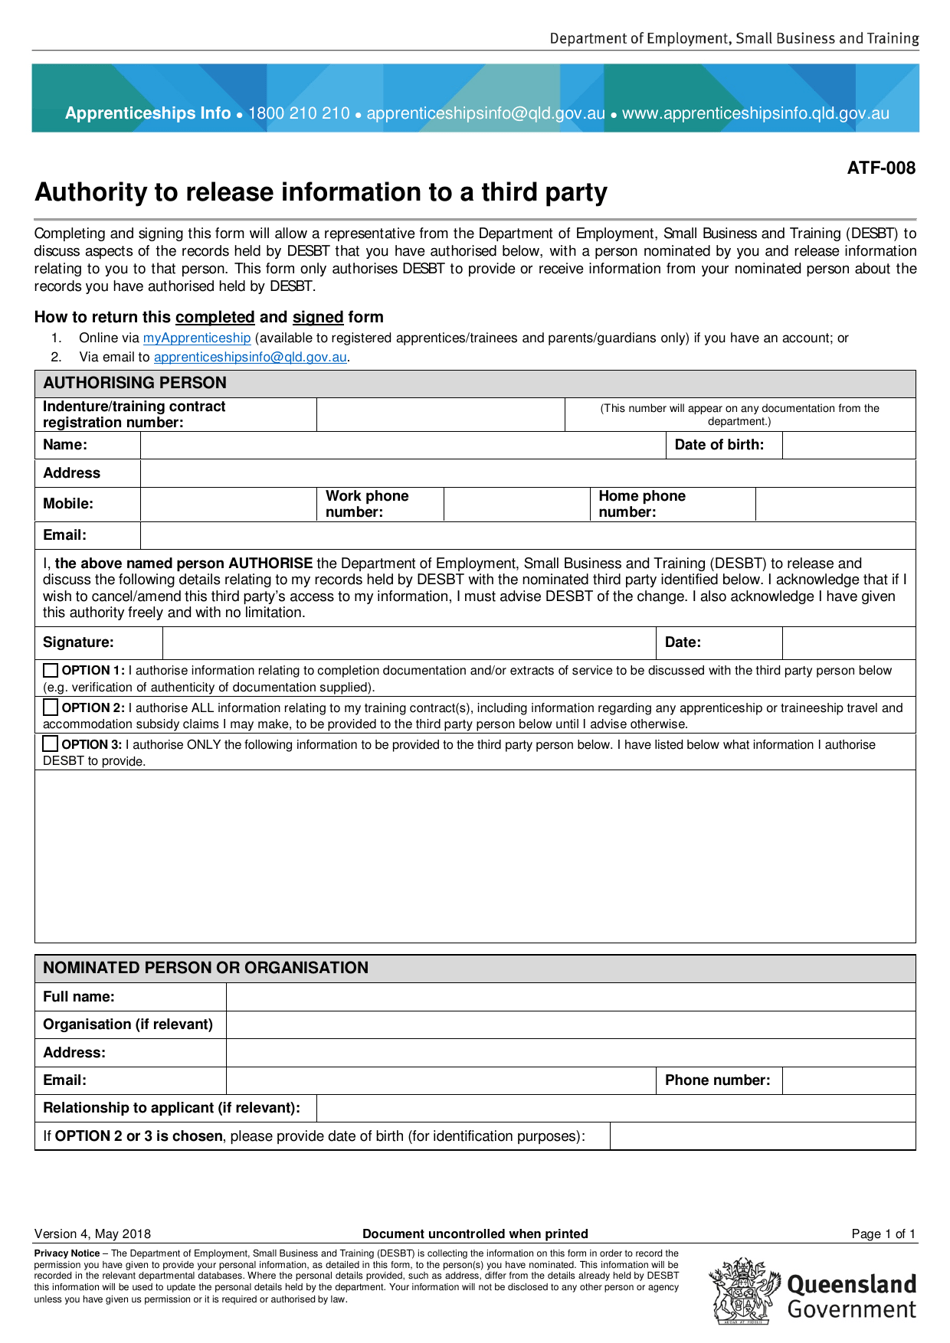 Form ATF-008 Authority to Release Information to a Third Party - Queensland, Australia, Page 1